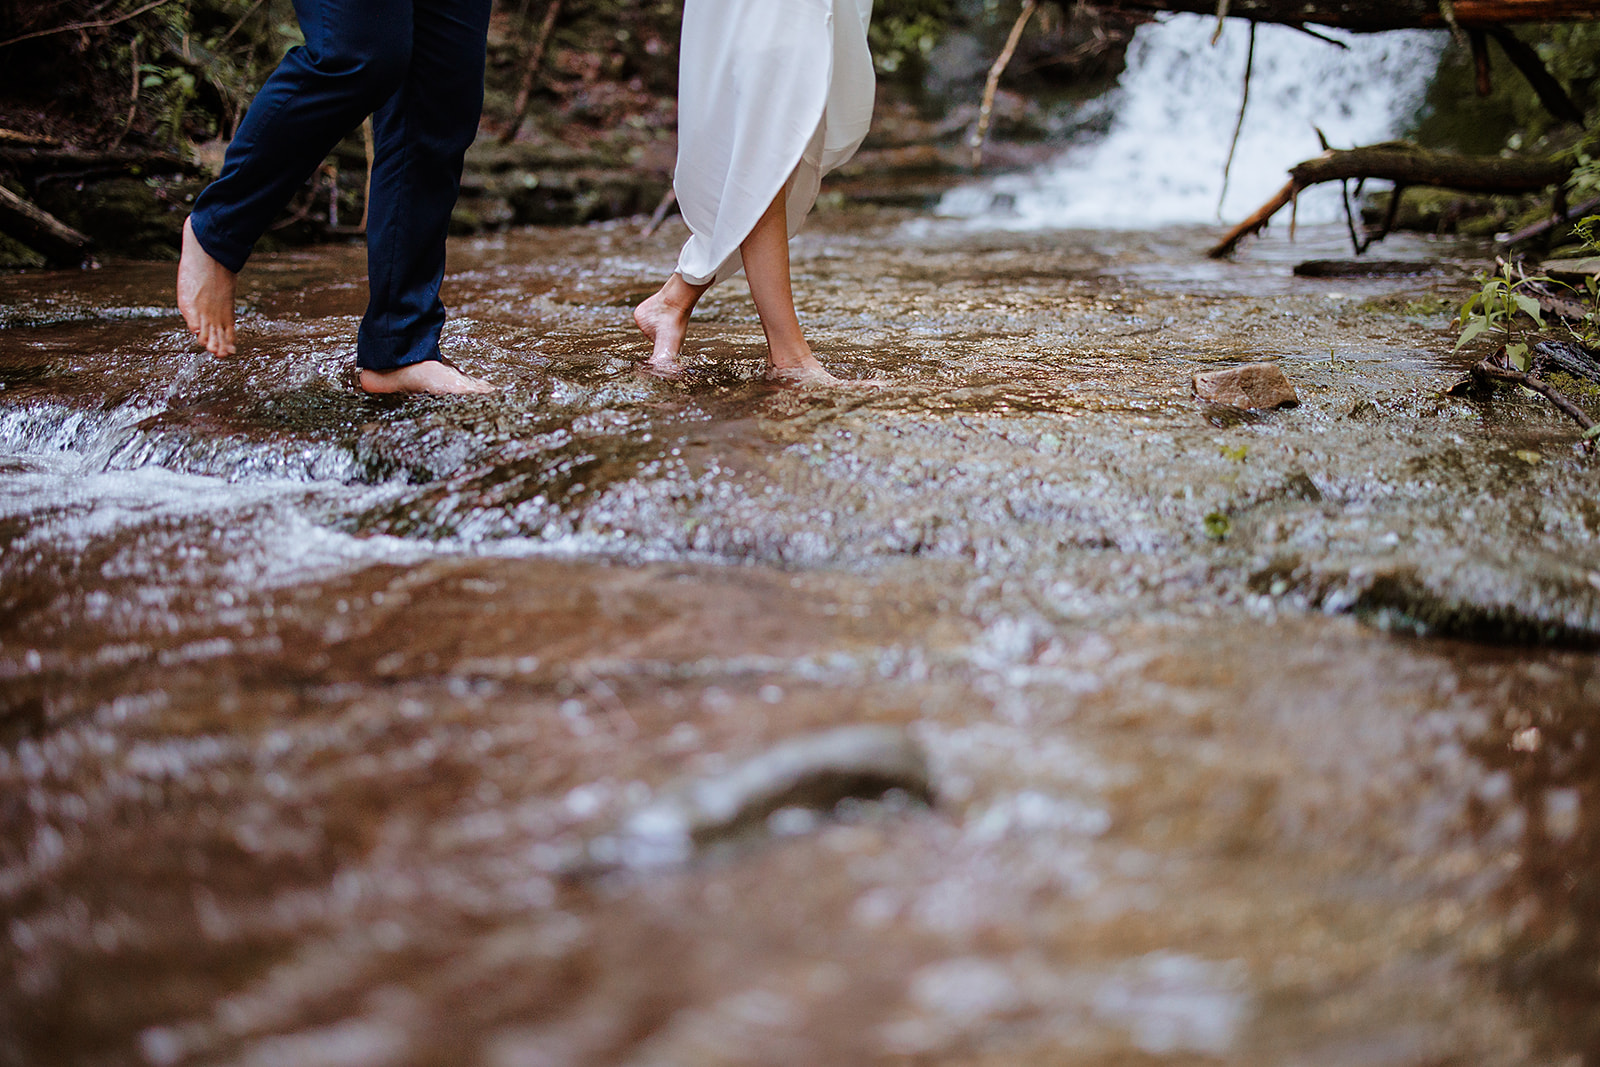 Couple walks through the river barefoot after saying their vows close by at intimate Catskill wedding.